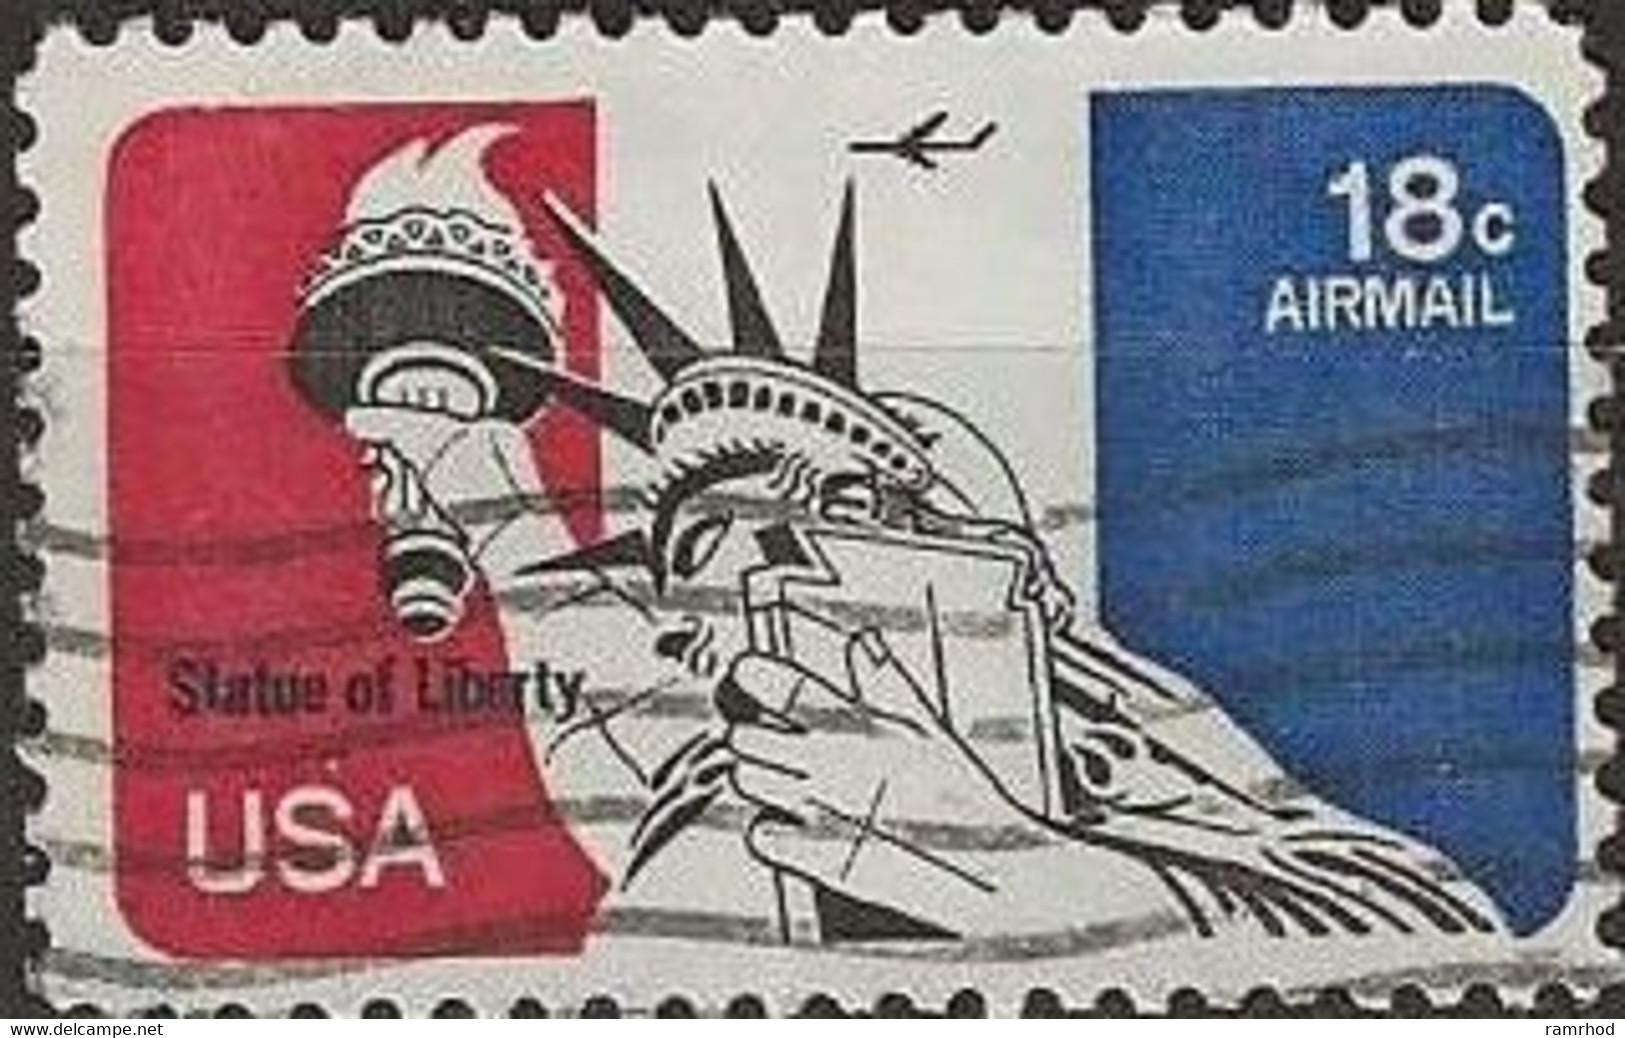 USA 1974 Air. Statue Of Liberty - 18c. - Black, Red And Blue FU - 3a. 1961-… Used